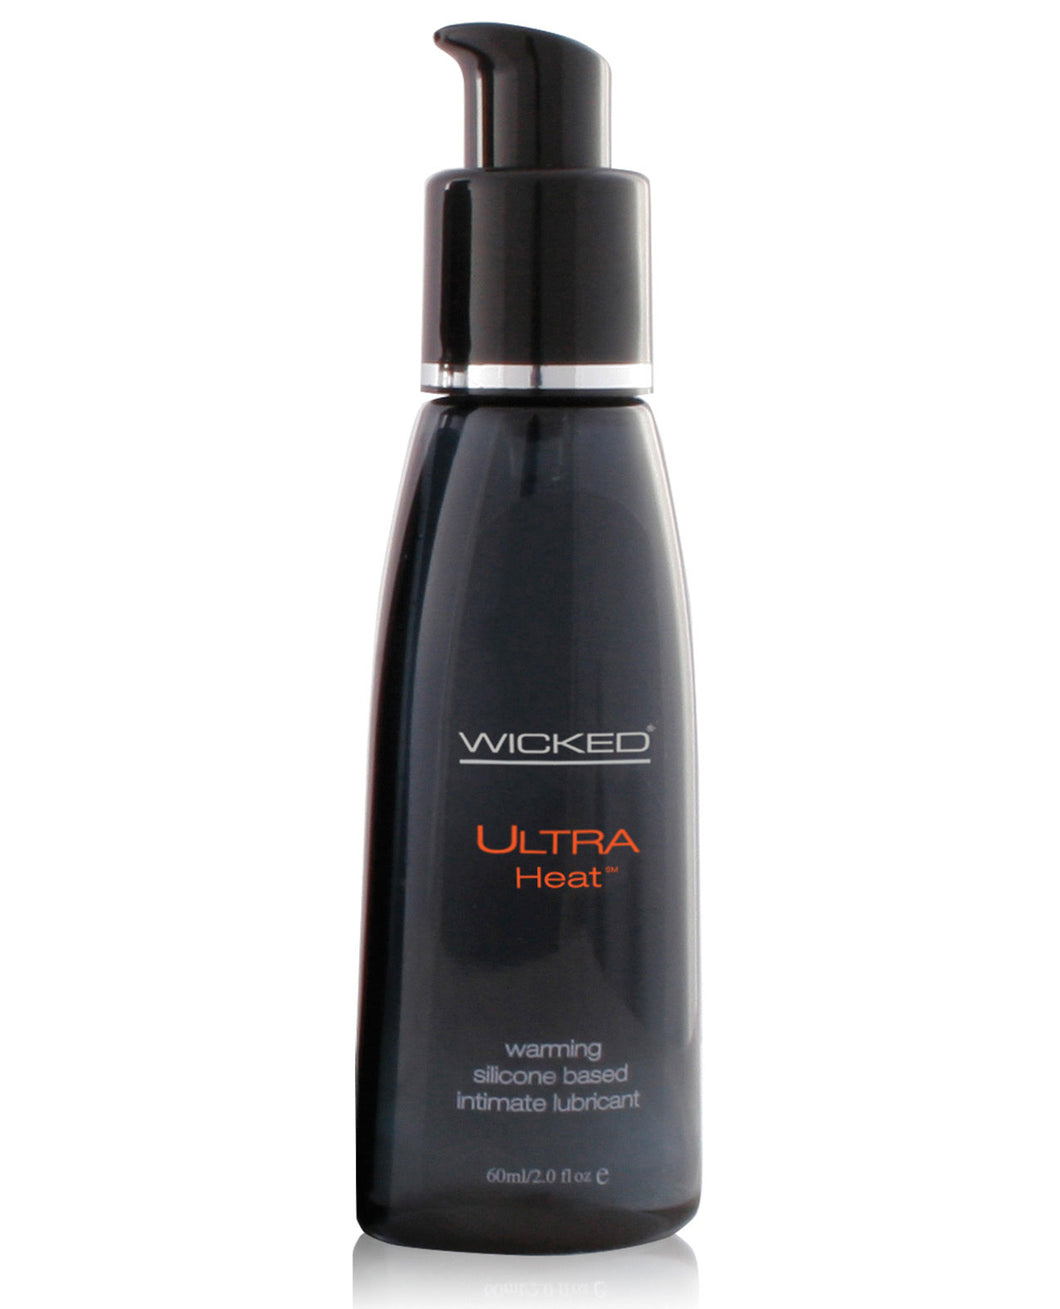 Wicked Sensual Care Ultra Heat Warming Sensation Silicone Based Lubricant - 2 Oz Fragrance Free